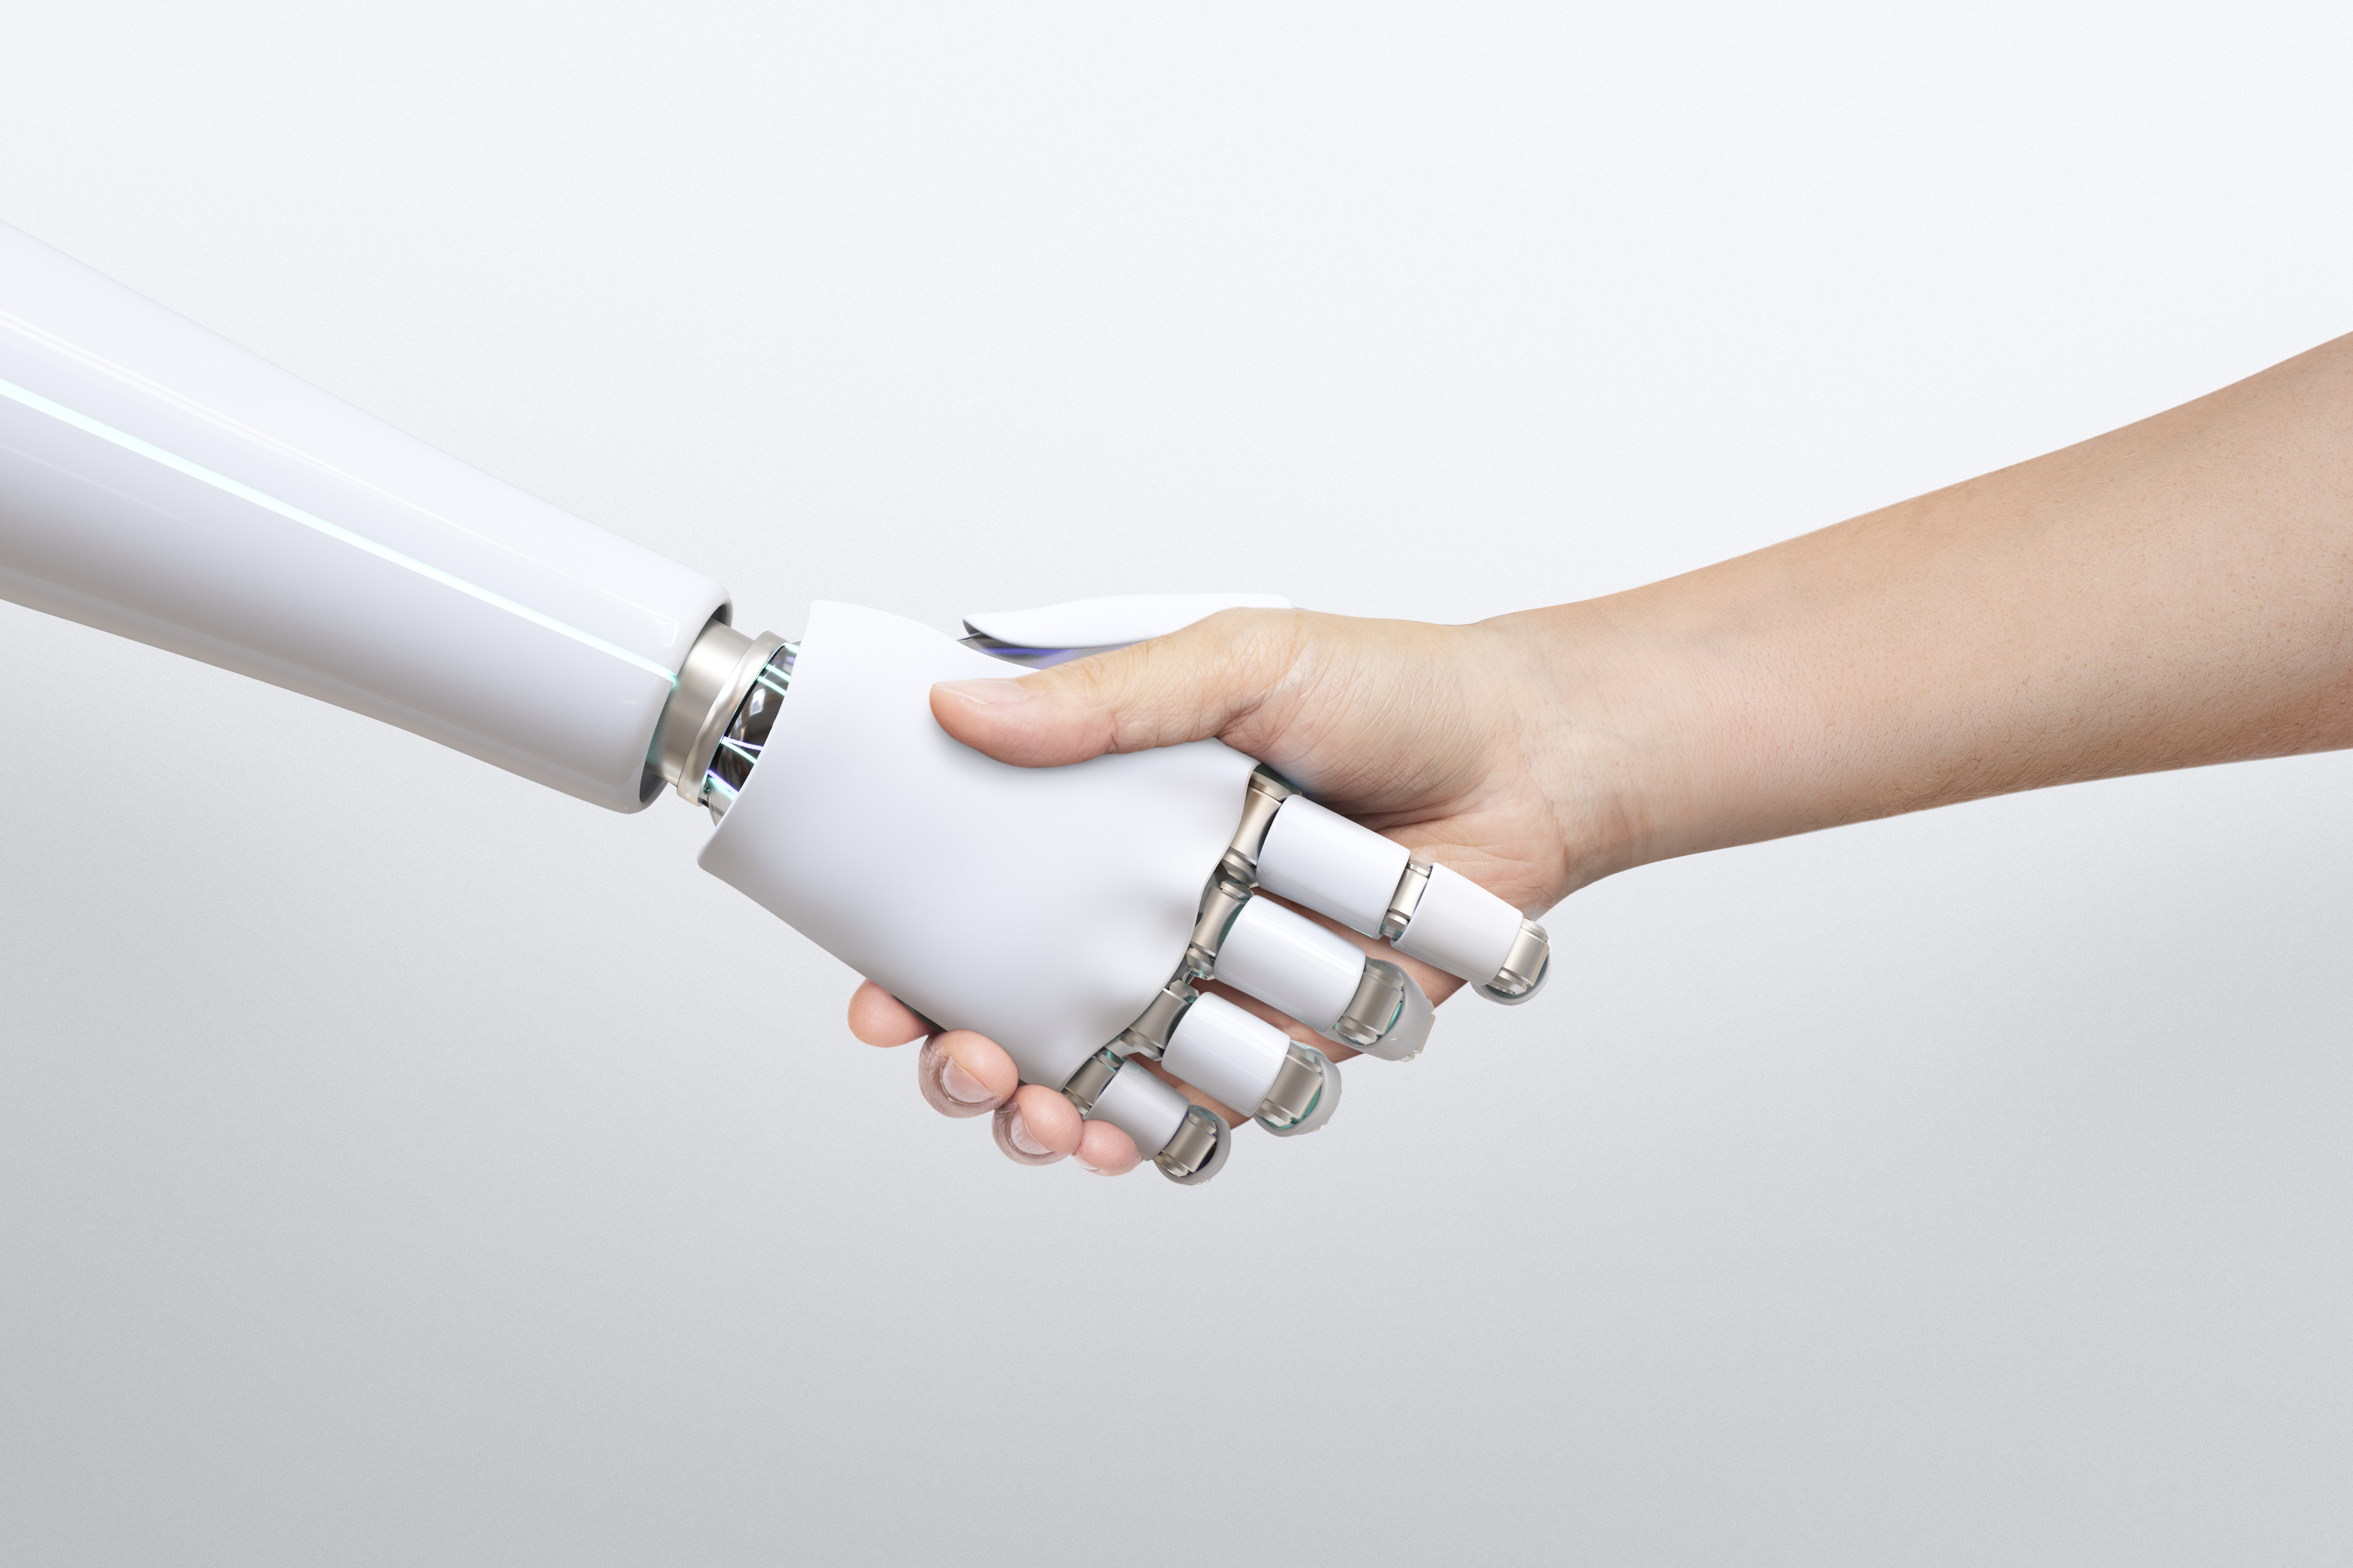 A robot hand shaking a human hand to promote The Imitation Game: Artificial Intelligence and Human Position